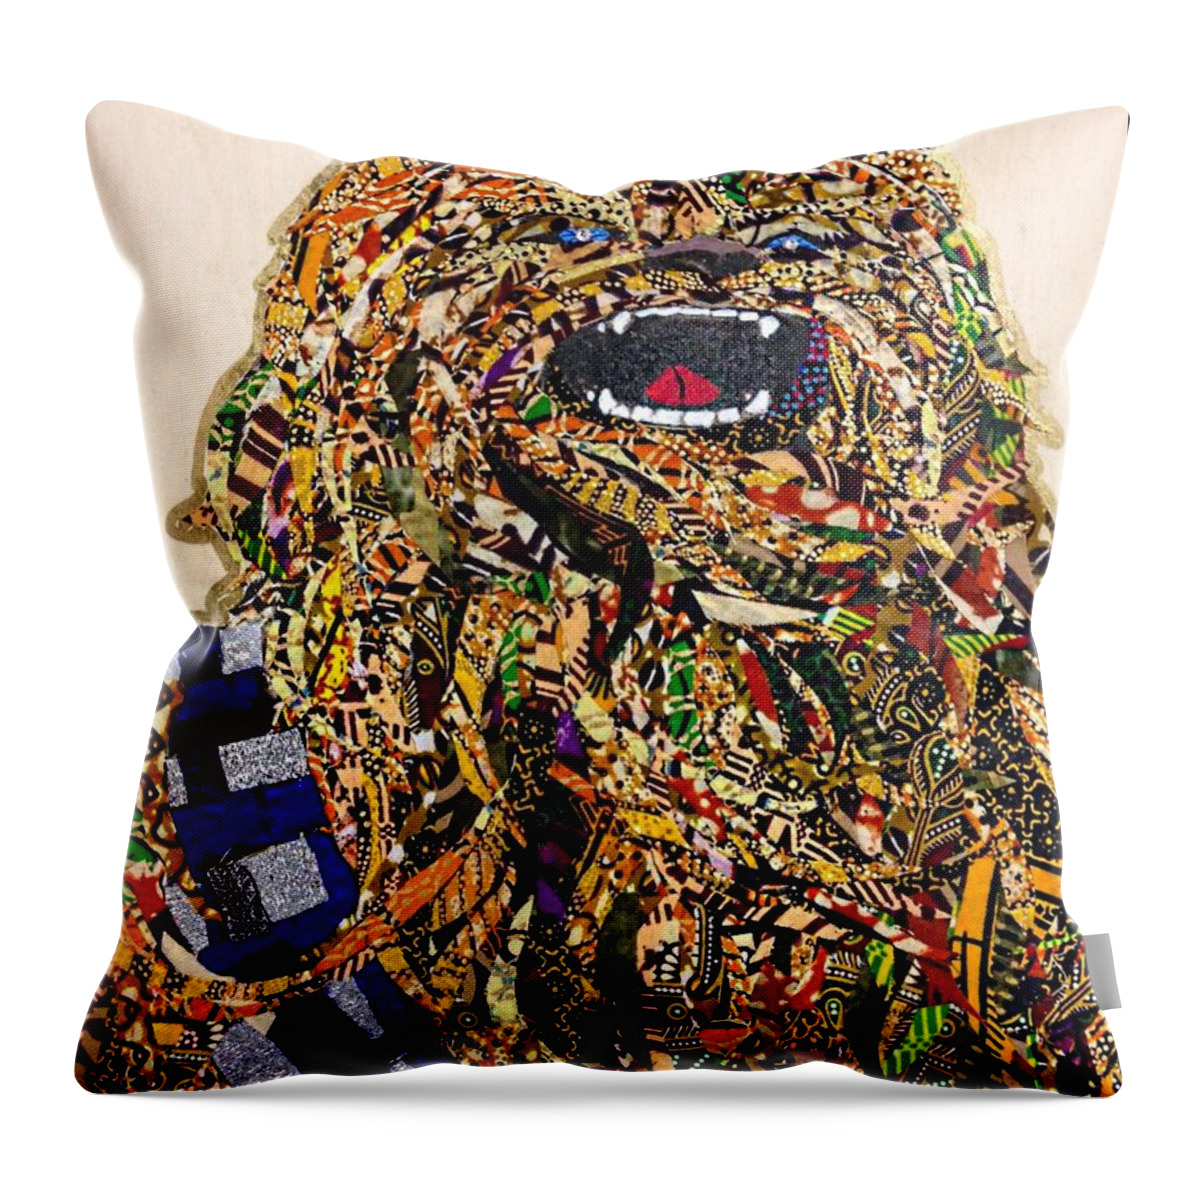 Chewbaccaa Throw Pillow featuring the tapestry - textile Chewbacca Star Wars Awakens Afrofuturist Collection by Apanaki Temitayo M